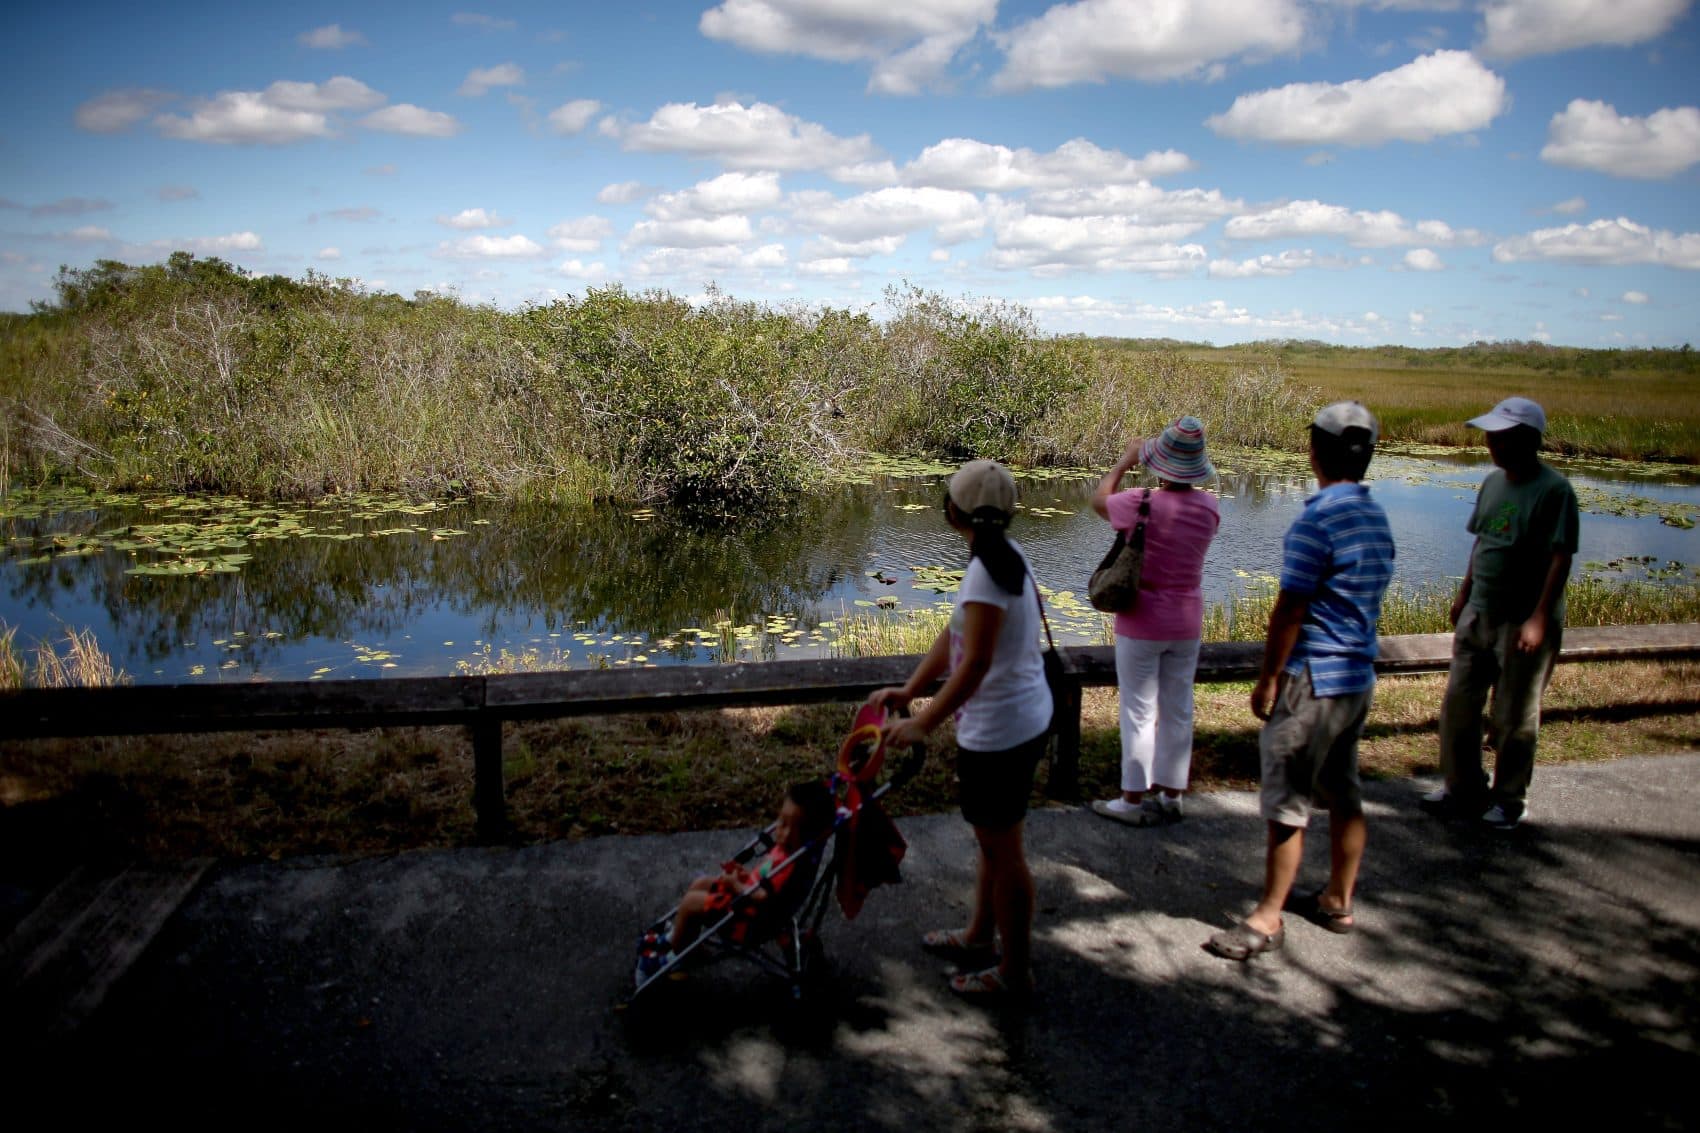 Visitors to the Everglades National Park enjoy the views on Oct. 17, 2013 in Miami, Florida. (Joe Raedle/Getty Images)